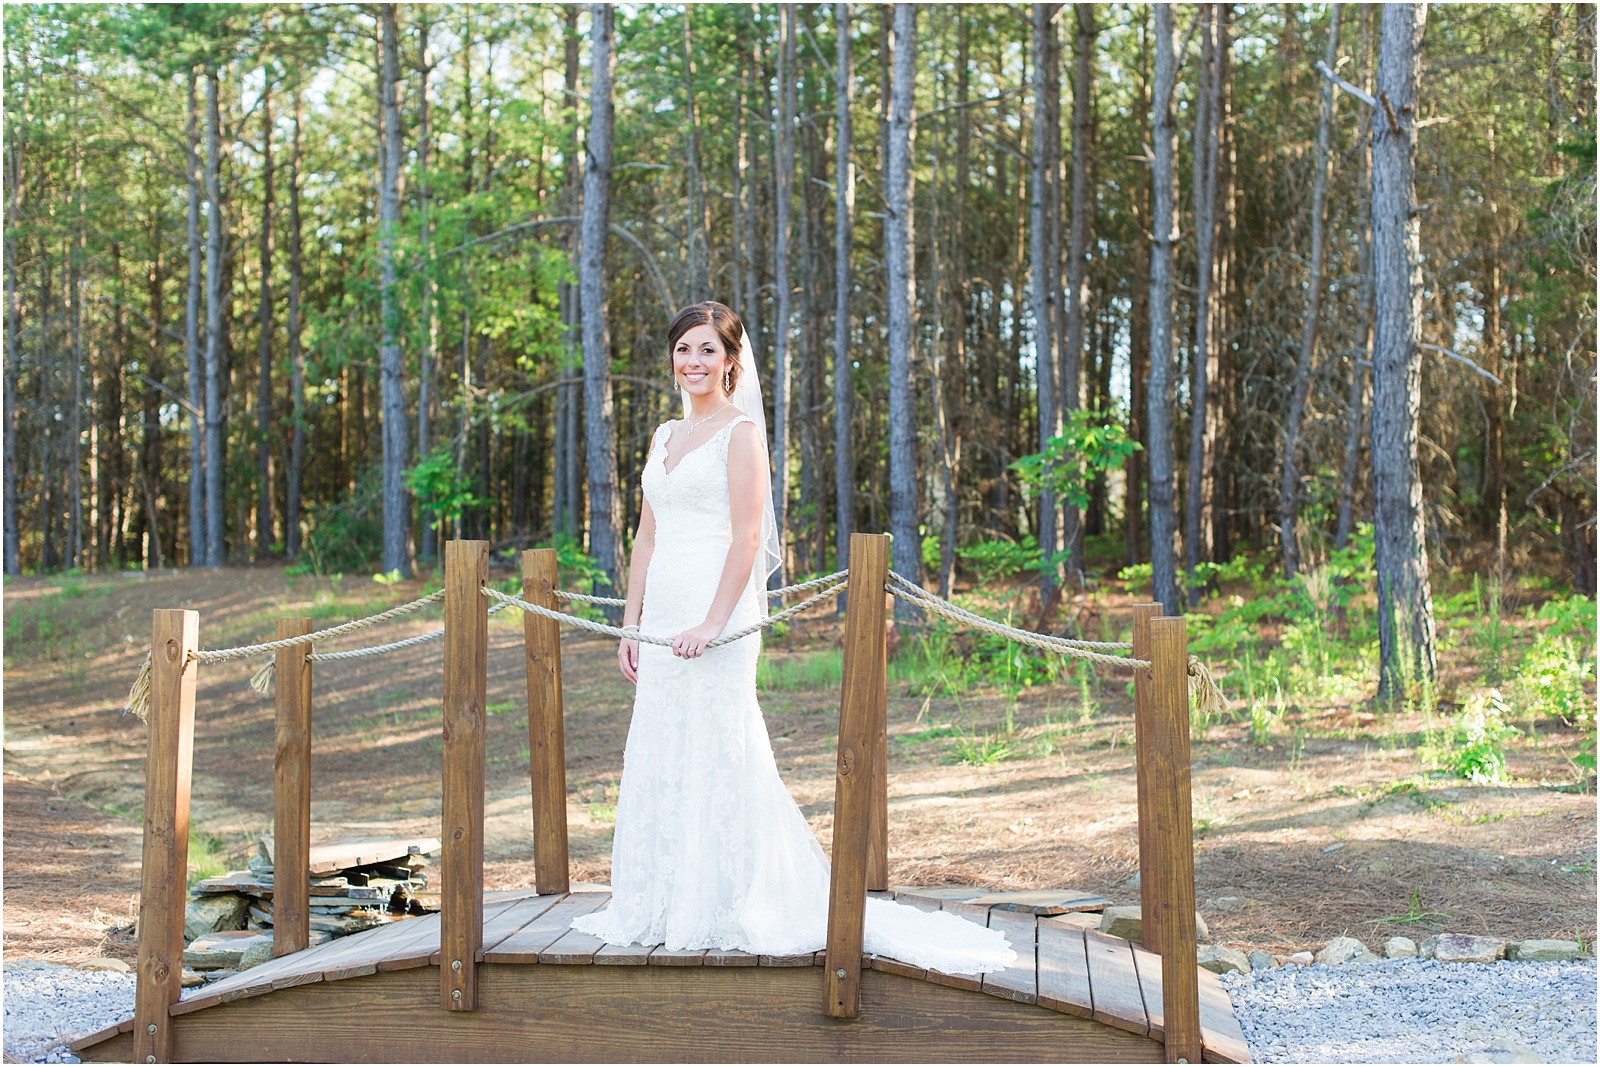 Bride standing on bridge for bridal session photograph at The Meadows At Walnut Cove